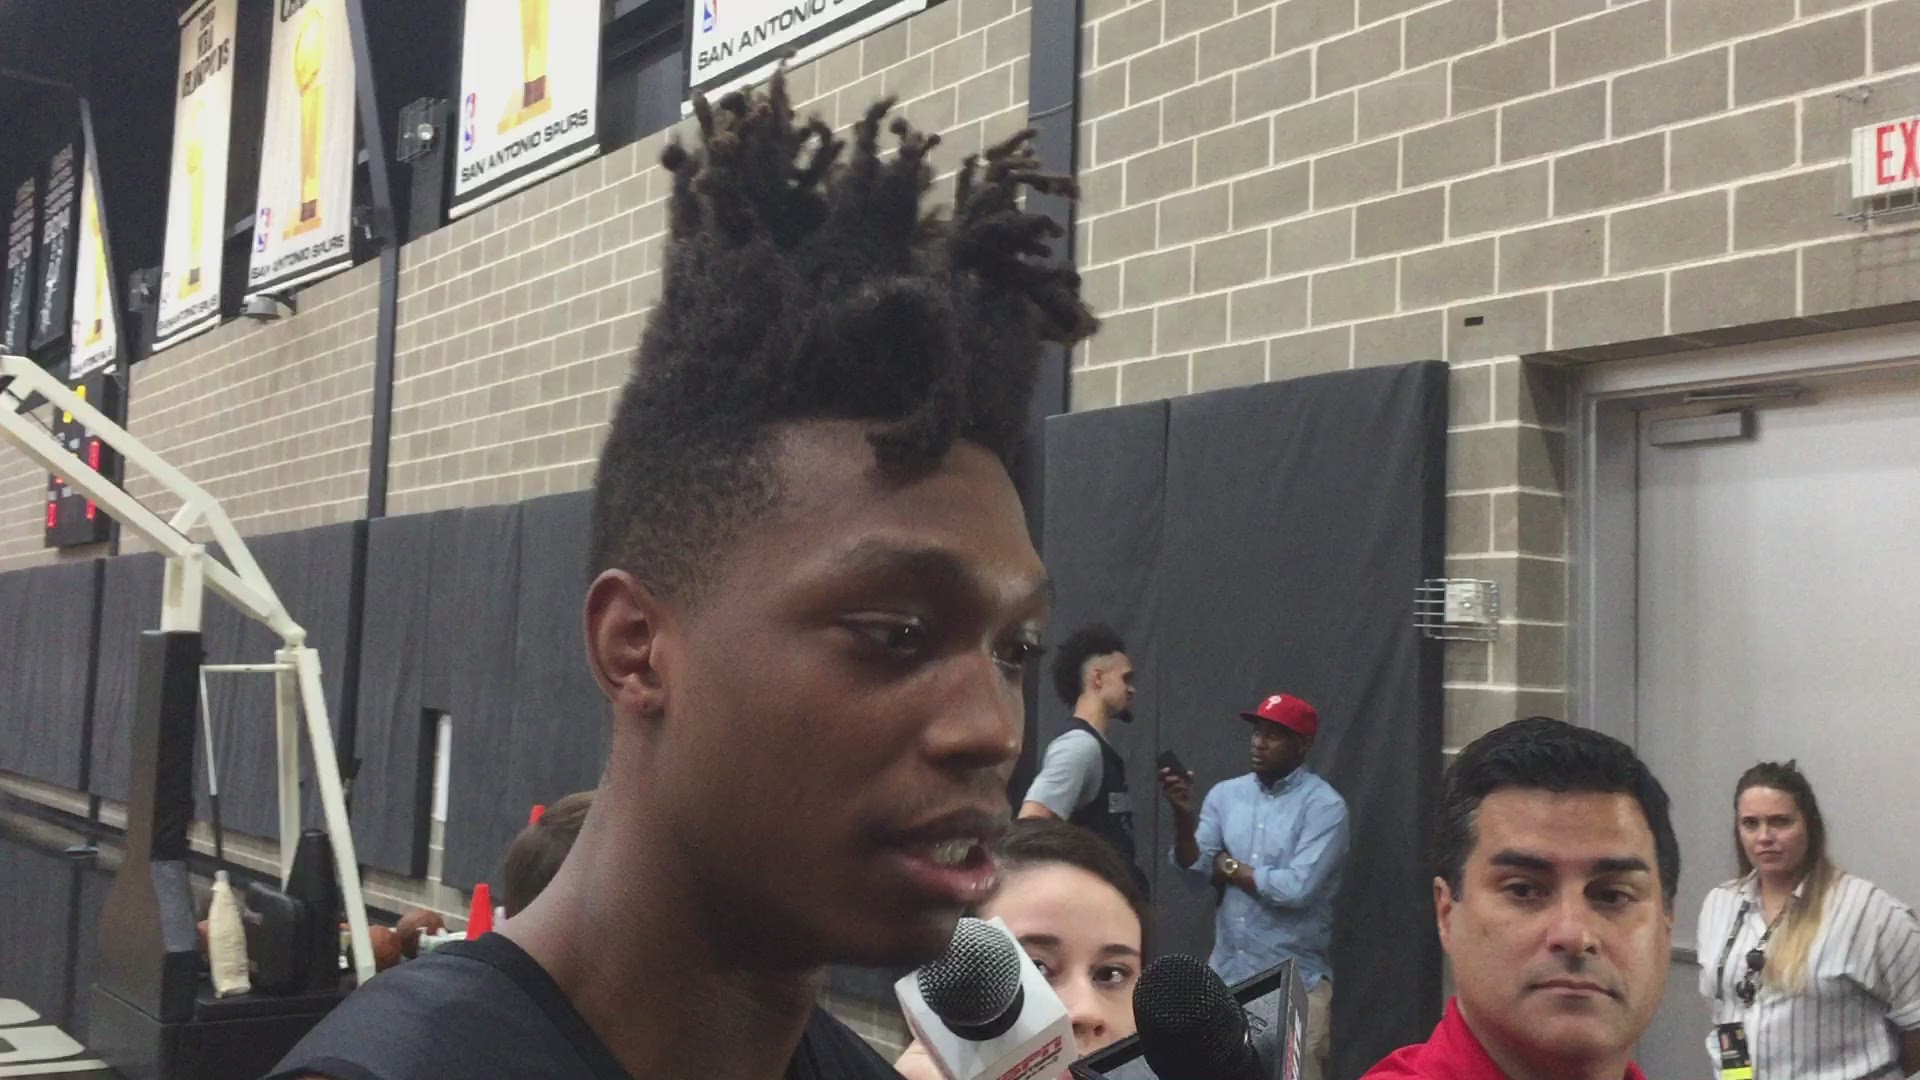 Spurs first-round draft Lonnie Walker IV on getting to work